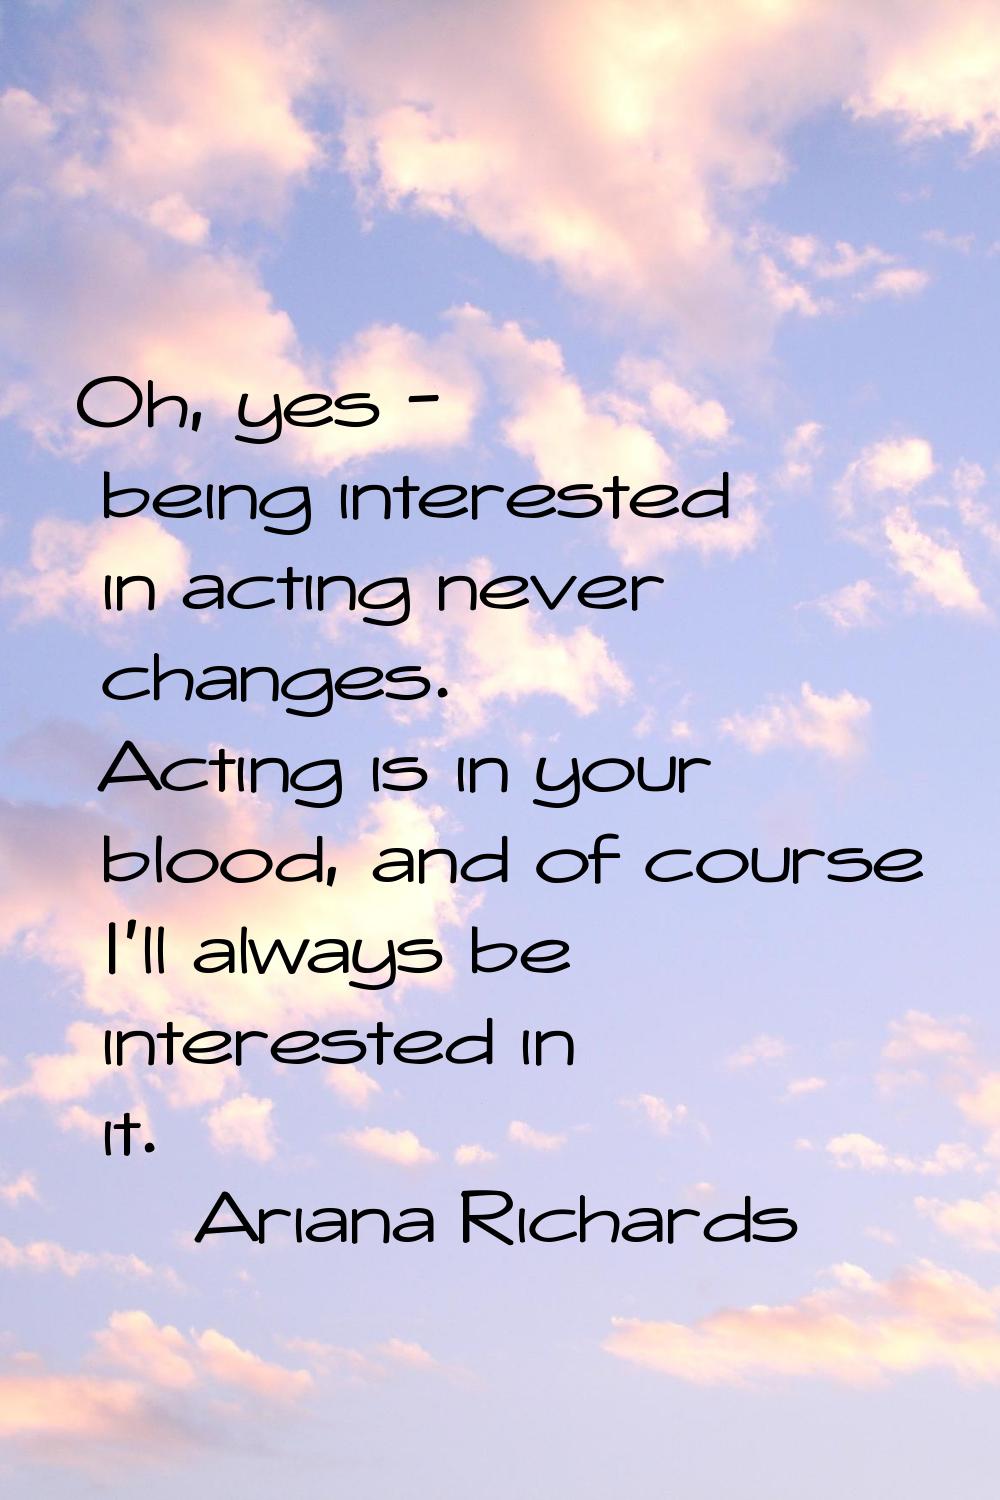 Oh, yes - being interested in acting never changes. Acting is in your blood, and of course I'll alw